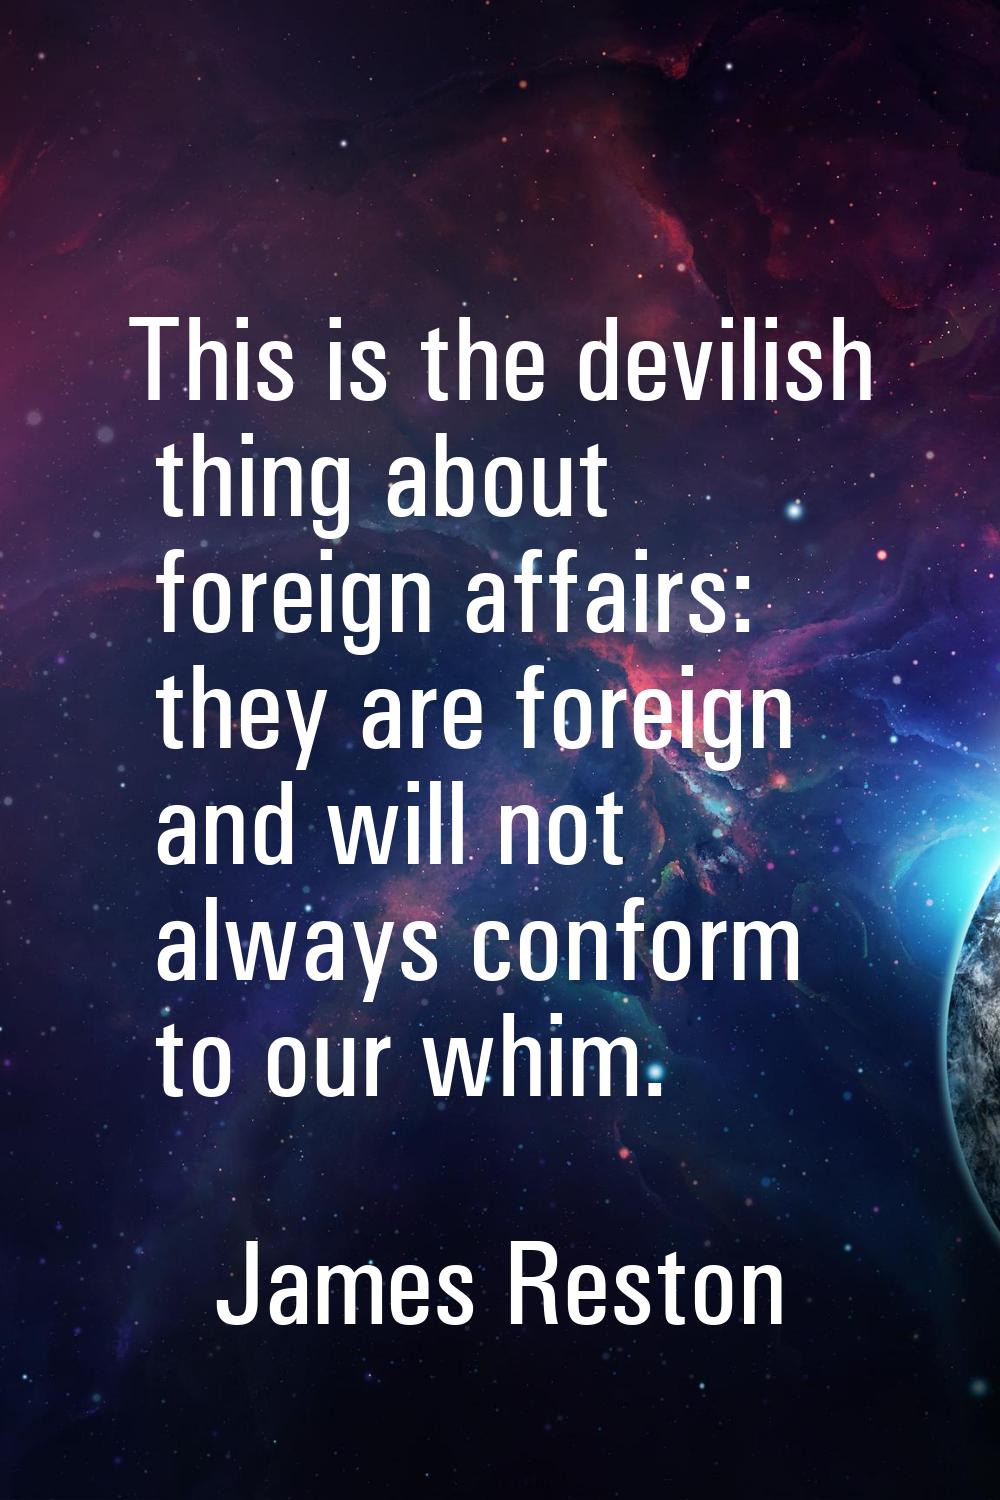 This is the devilish thing about foreign affairs: they are foreign and will not always conform to o